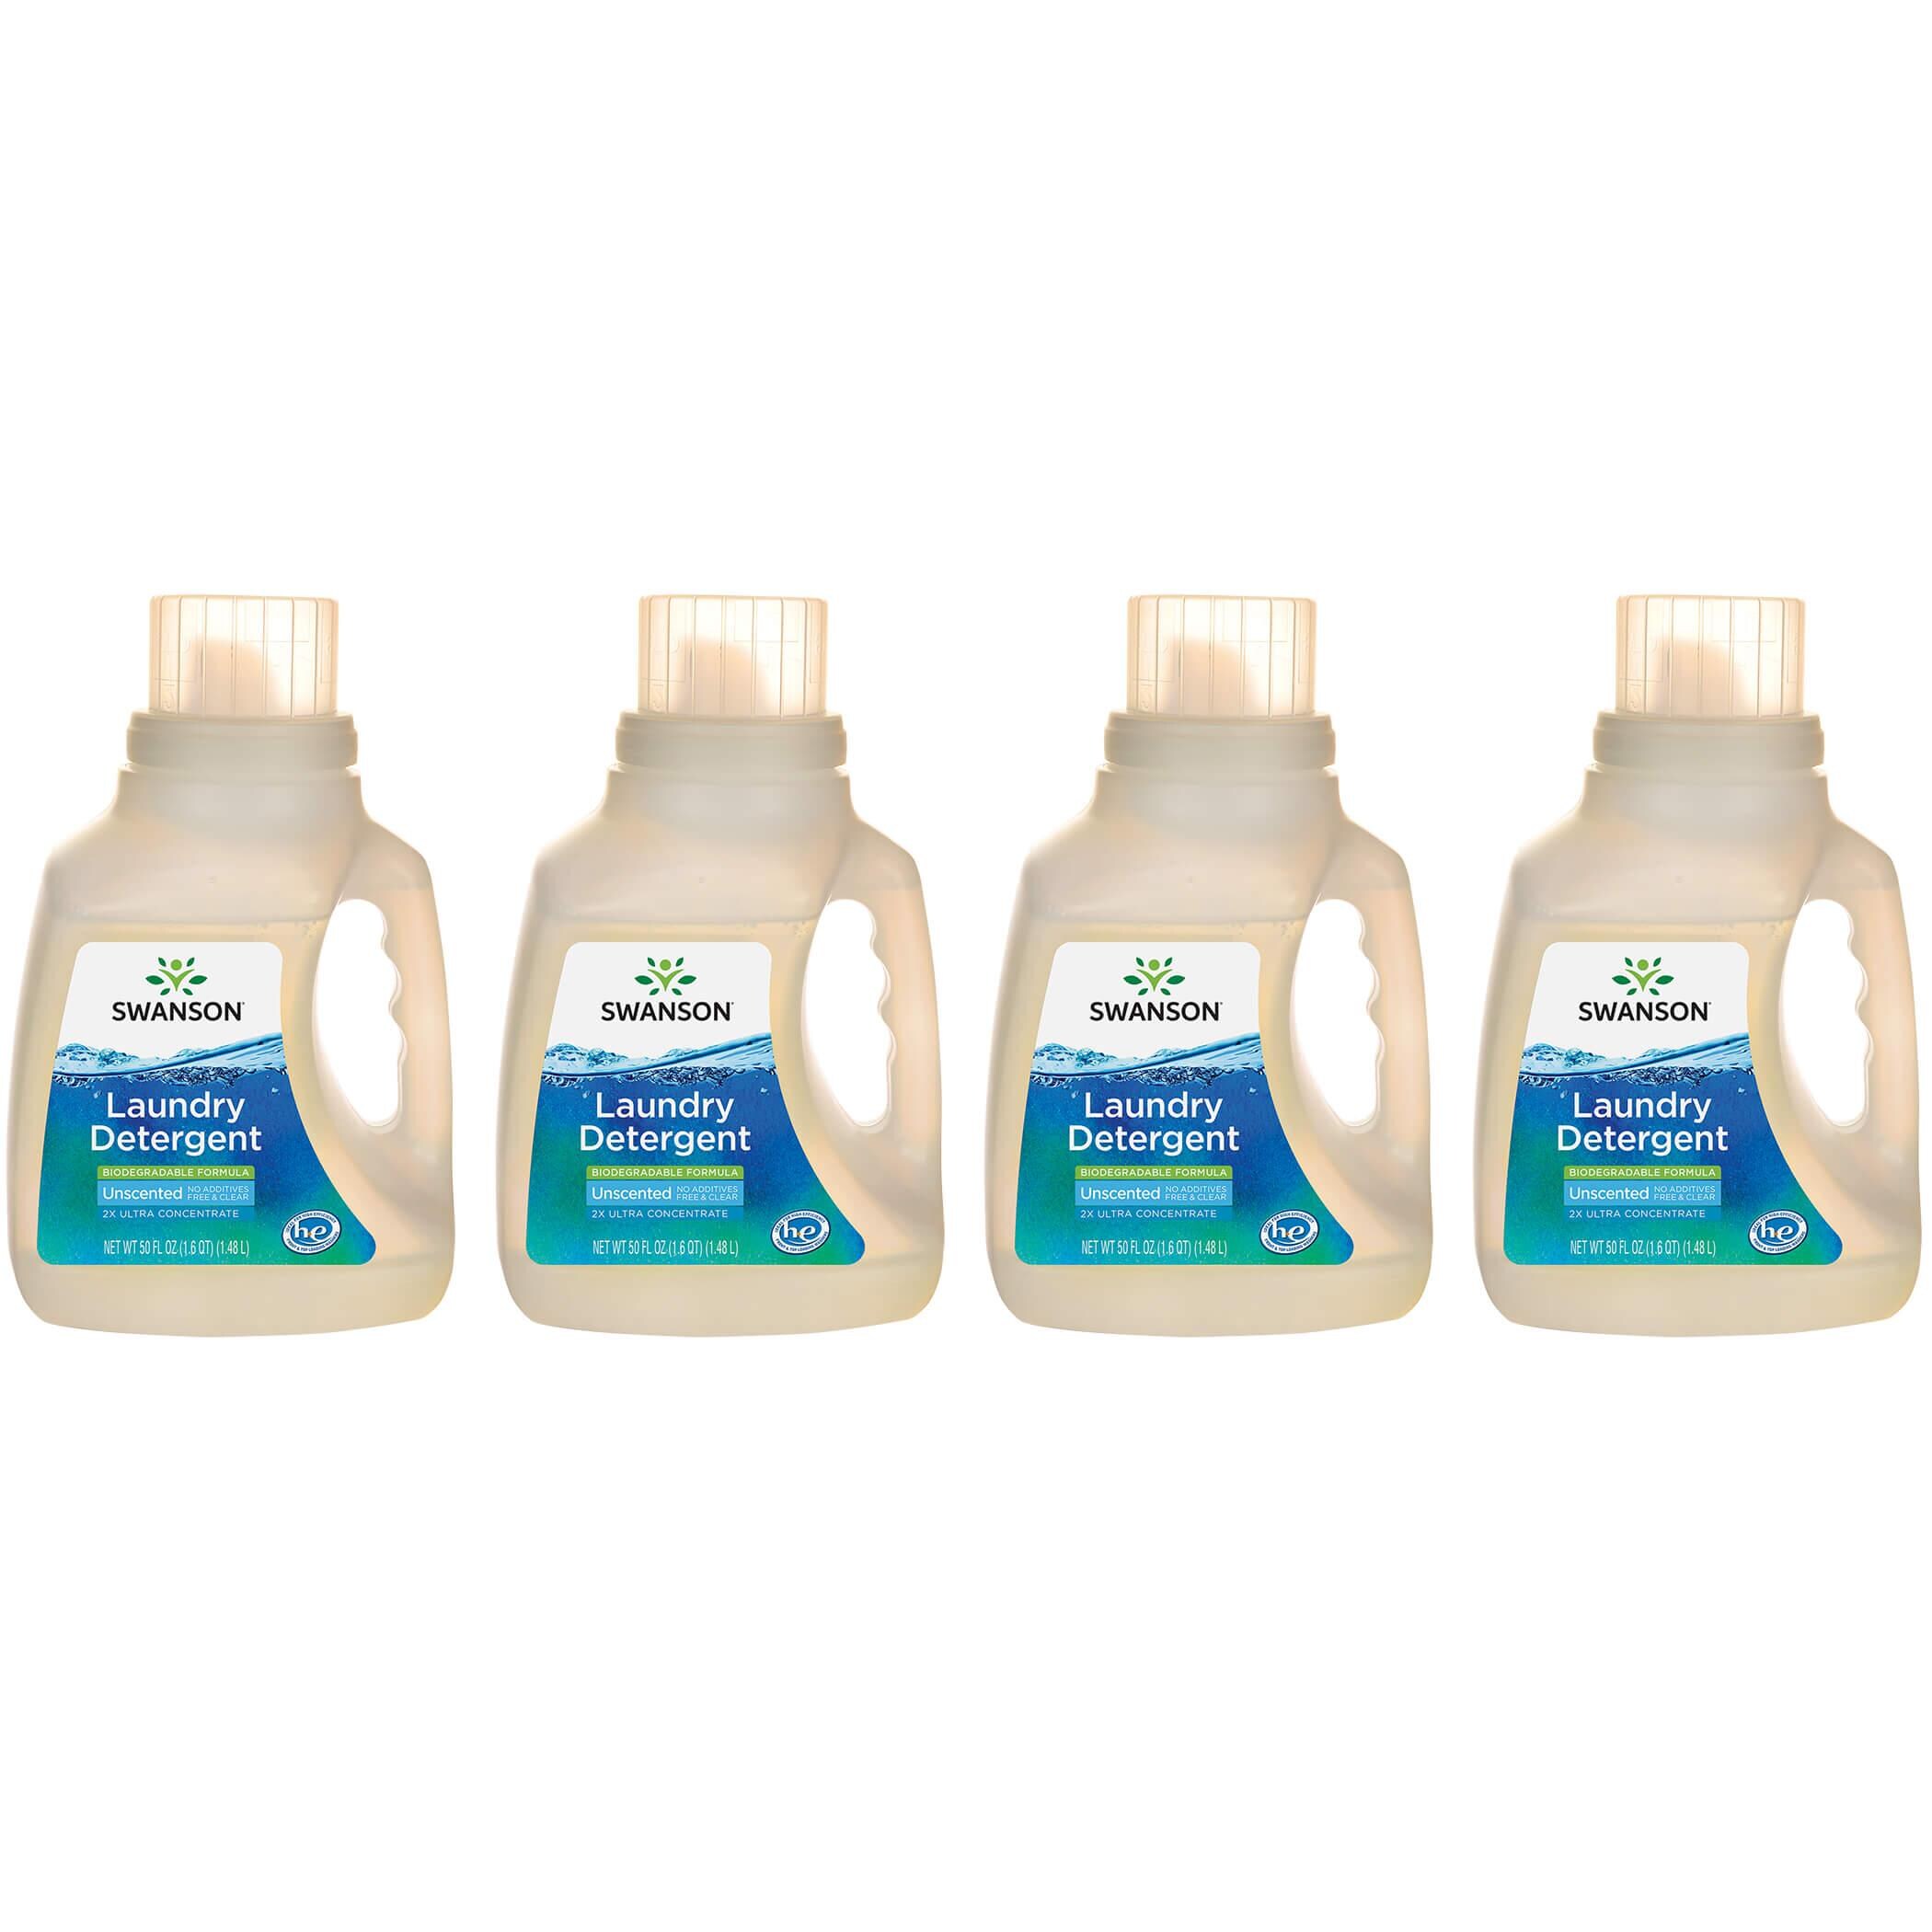 Swanson Healthy Home Laundry Detergent - Eco-Friendly Unscented 4 Pack 50 fl oz Liquid